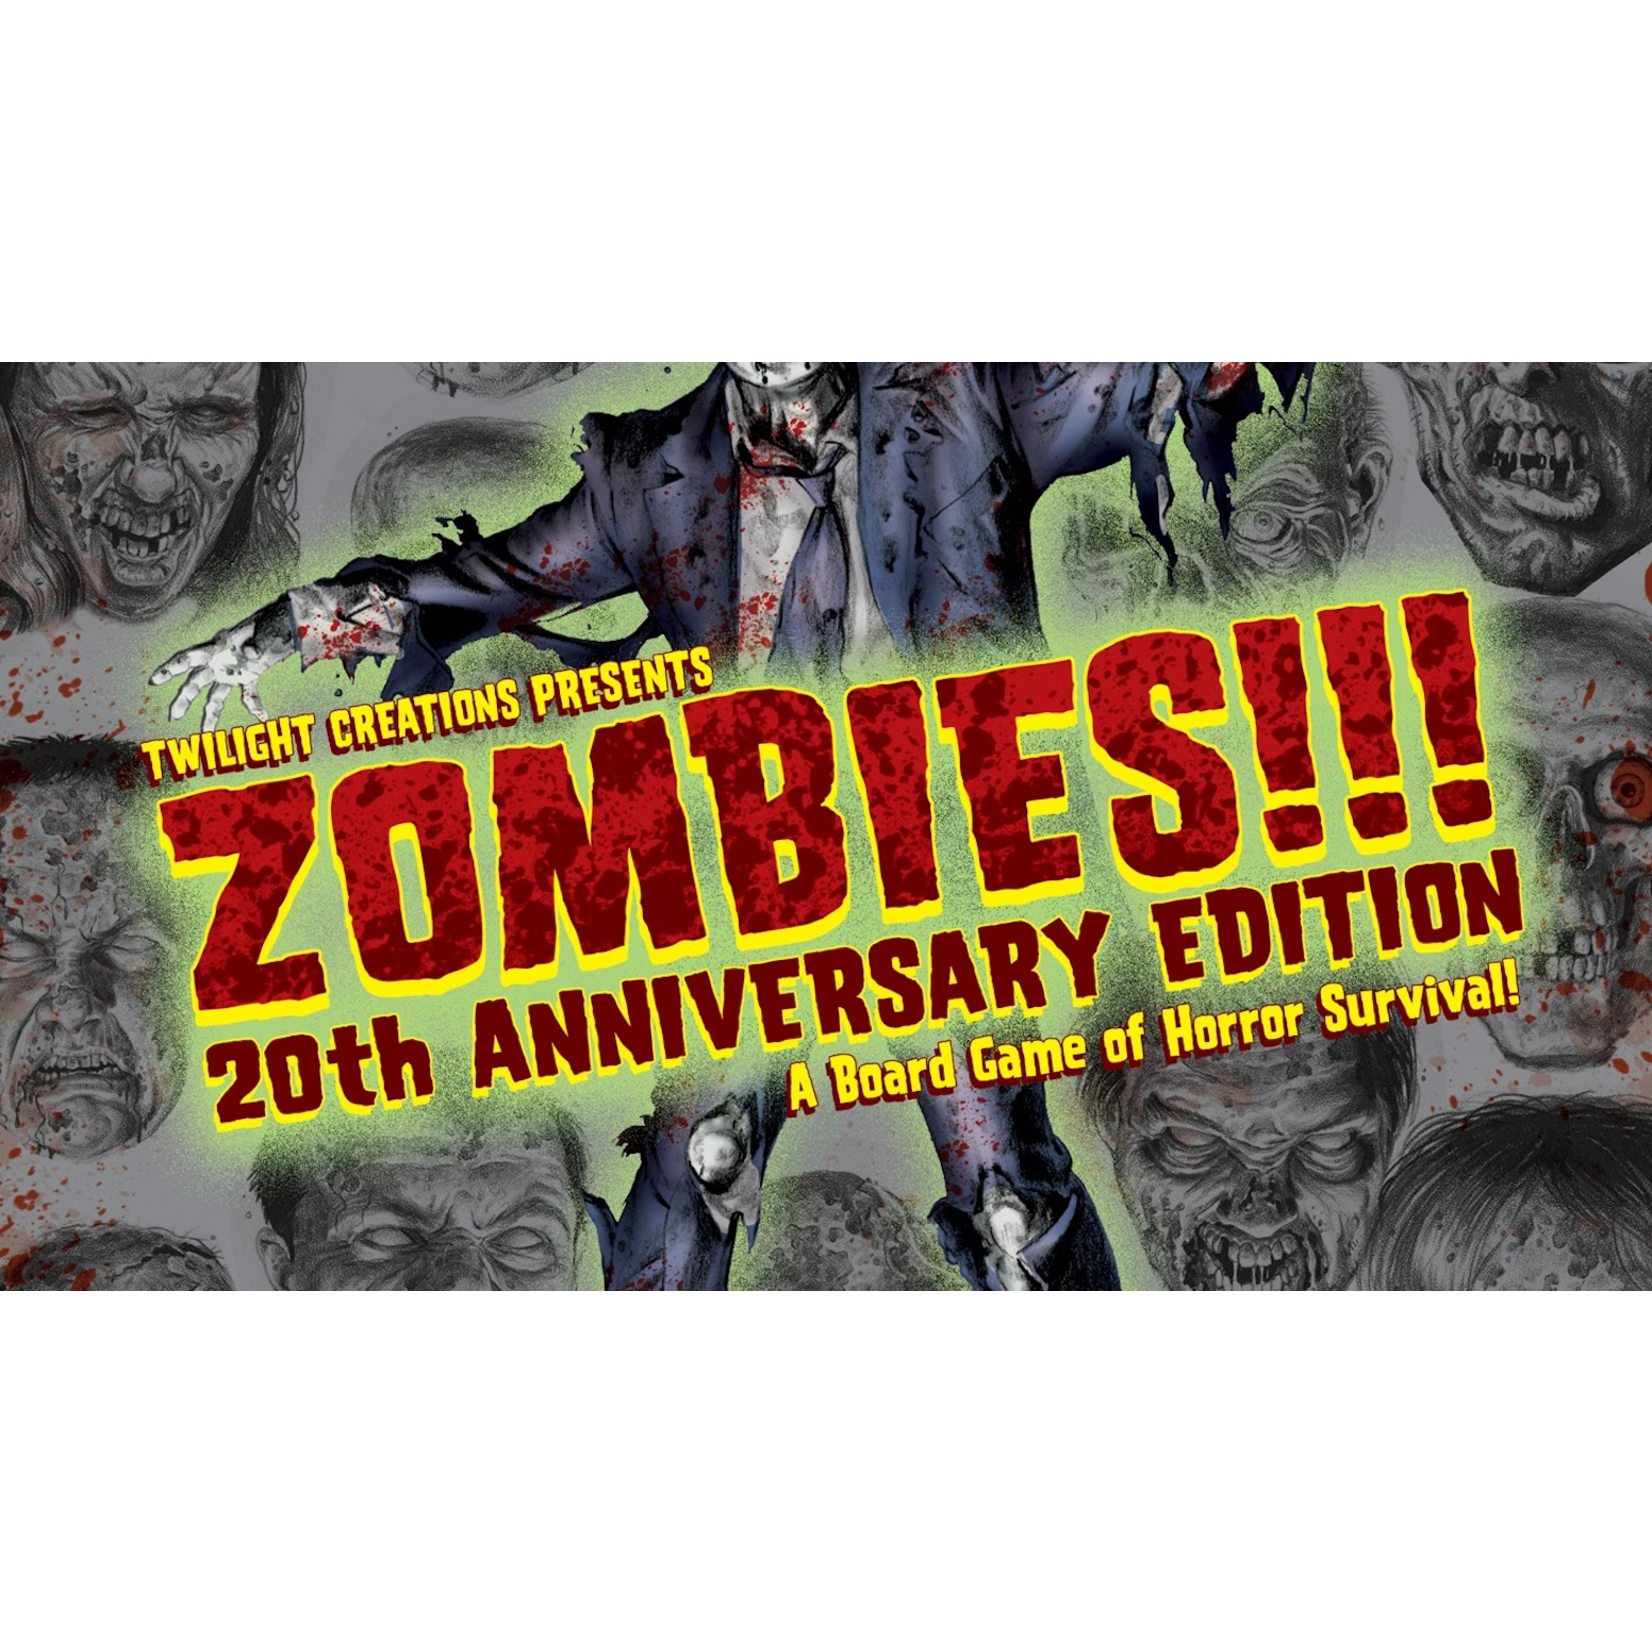 Twilight Creations Zombies!!! 20th Anniversary Edition + Museum of Weird